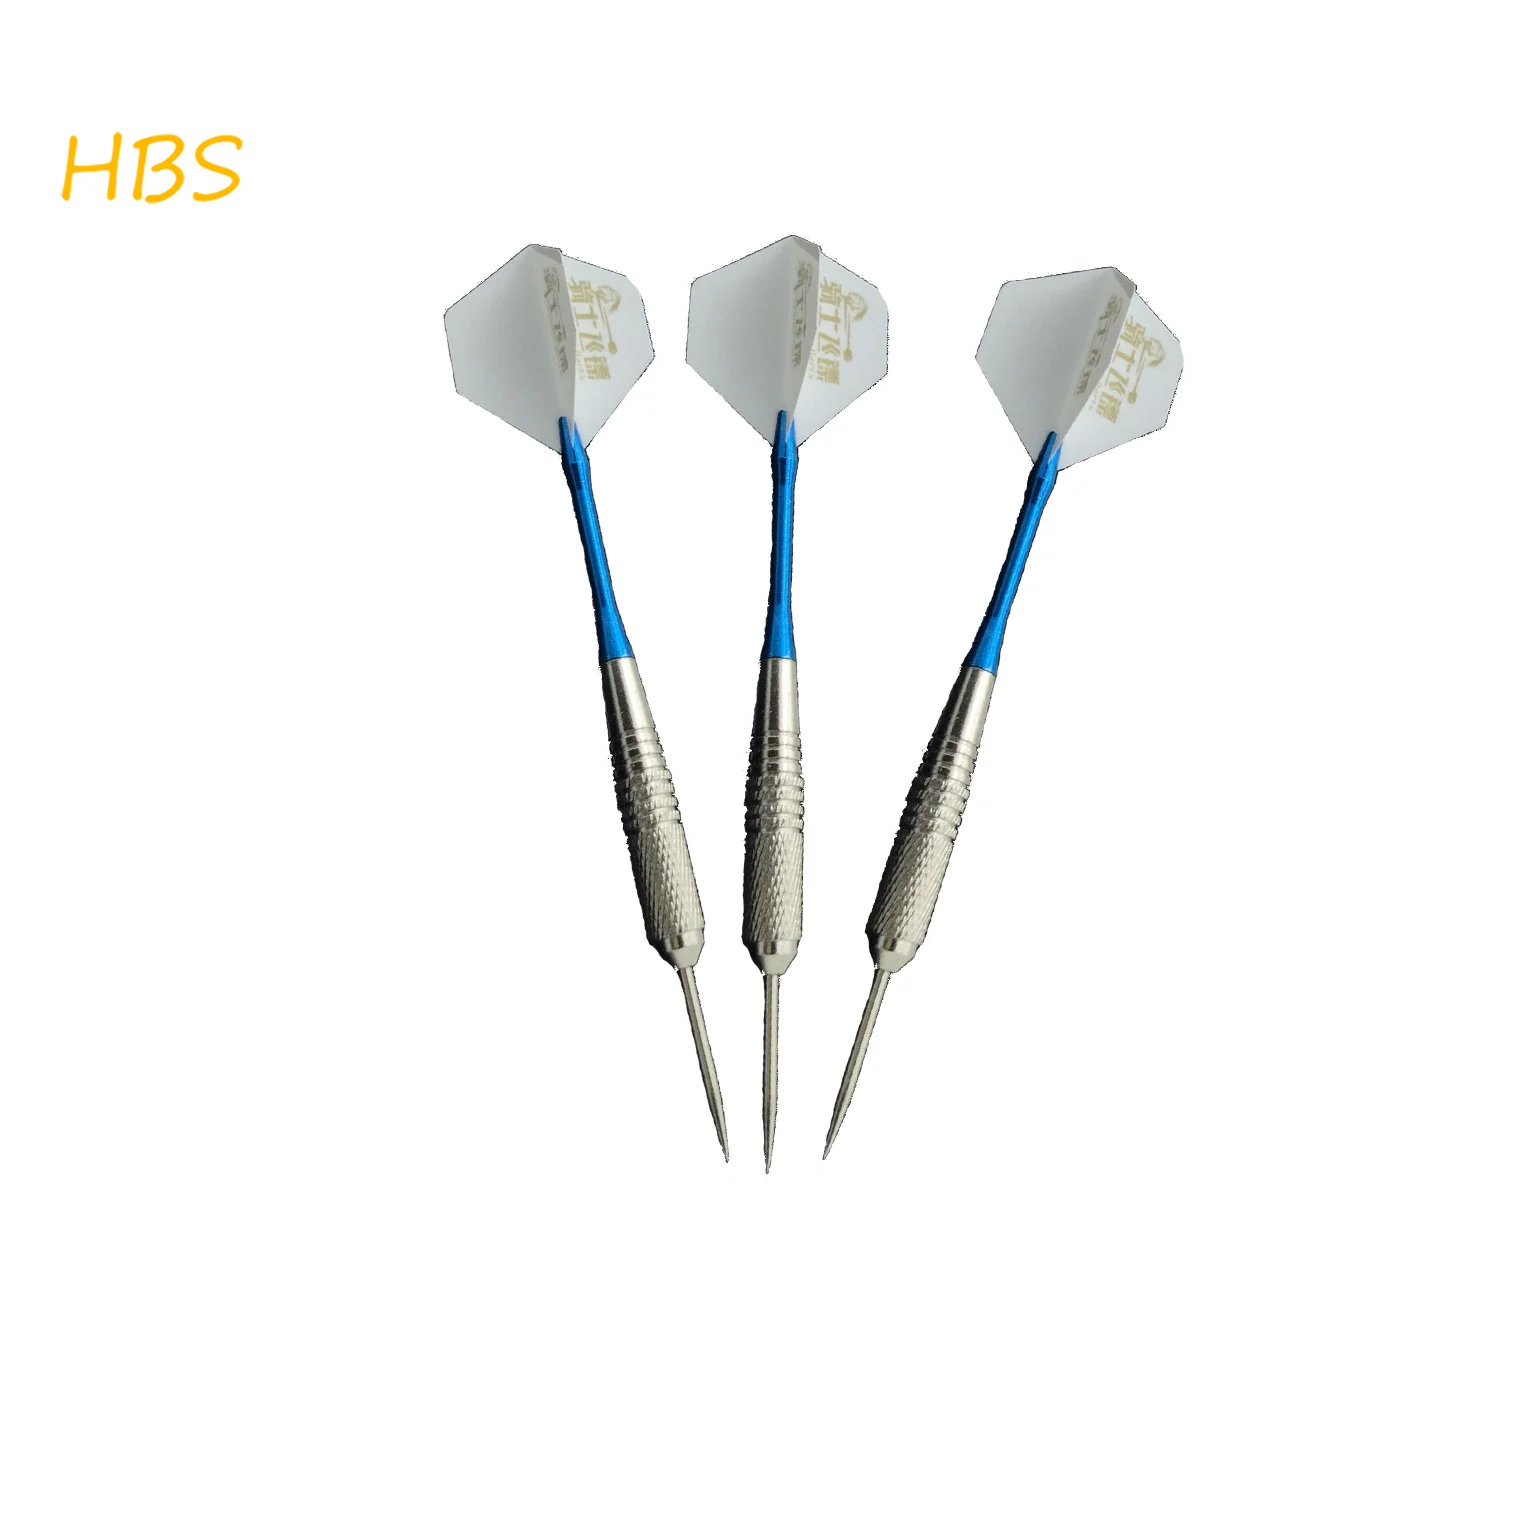 3 PCS 21g Hard Darts Aluminum Alloy Blue Darts Series Indoor Competitive Entertainment Family Party Entertainment 2in1 led little sun magic ball ktv flash colorful bar box rotating laser light family party dormitory dance table lighting